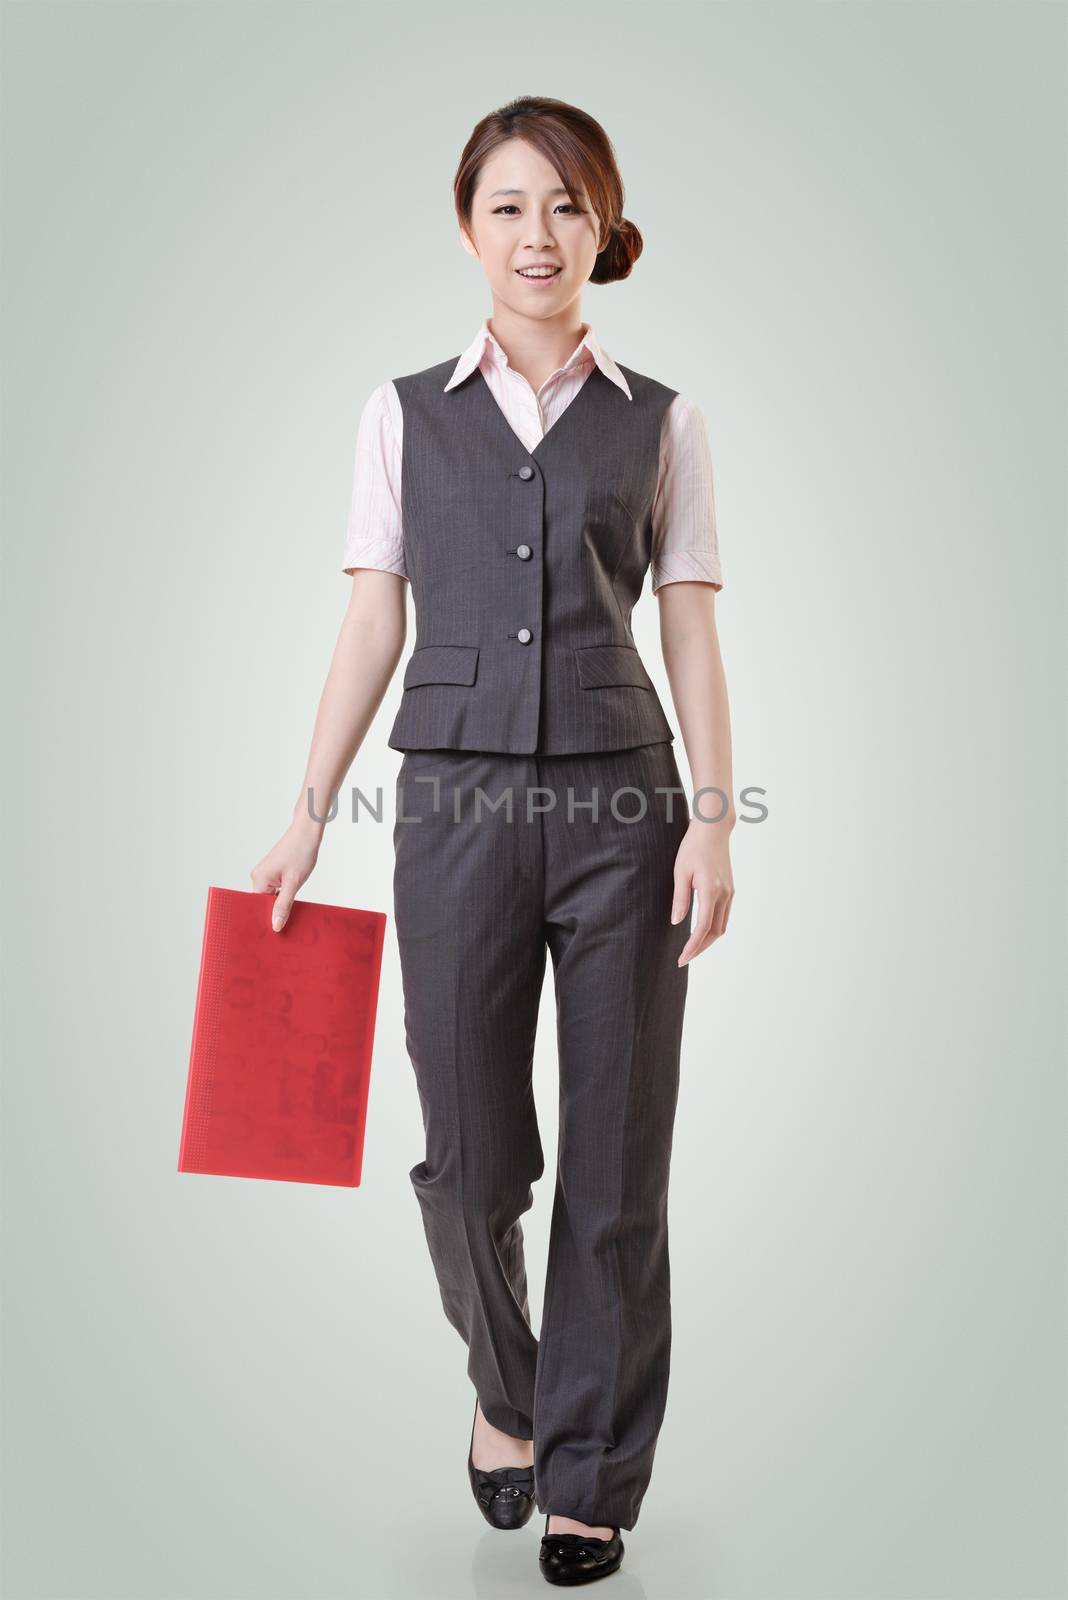 Asian business woman standing against studio background, full length portrait with clipping path.